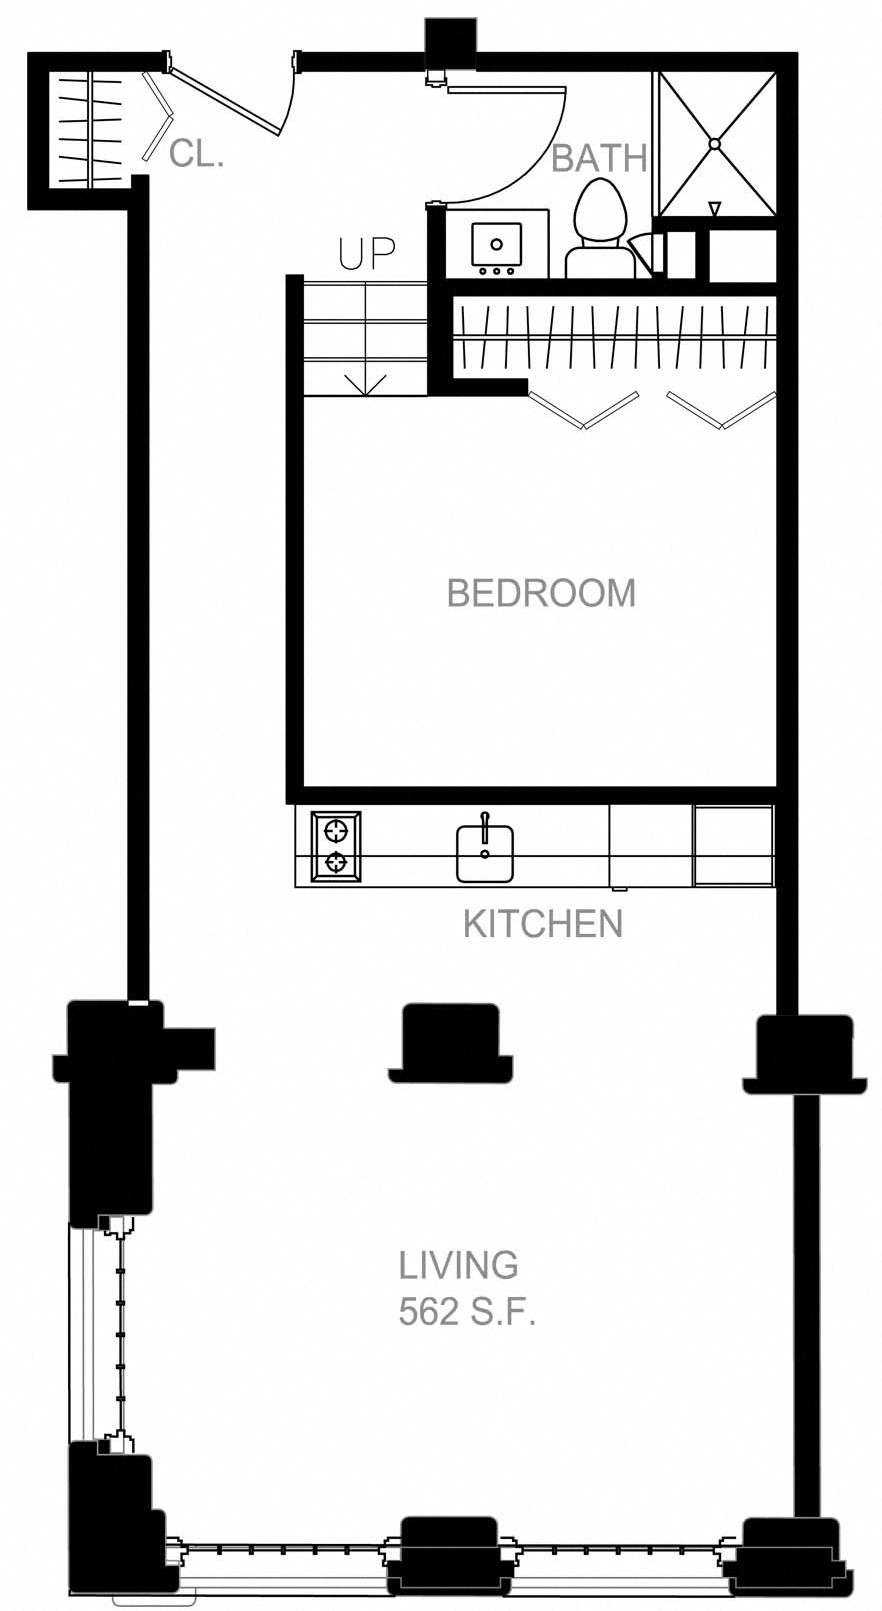 Floorplan for Apartment #S2305, 0 bedroom unit at Halstead Providence